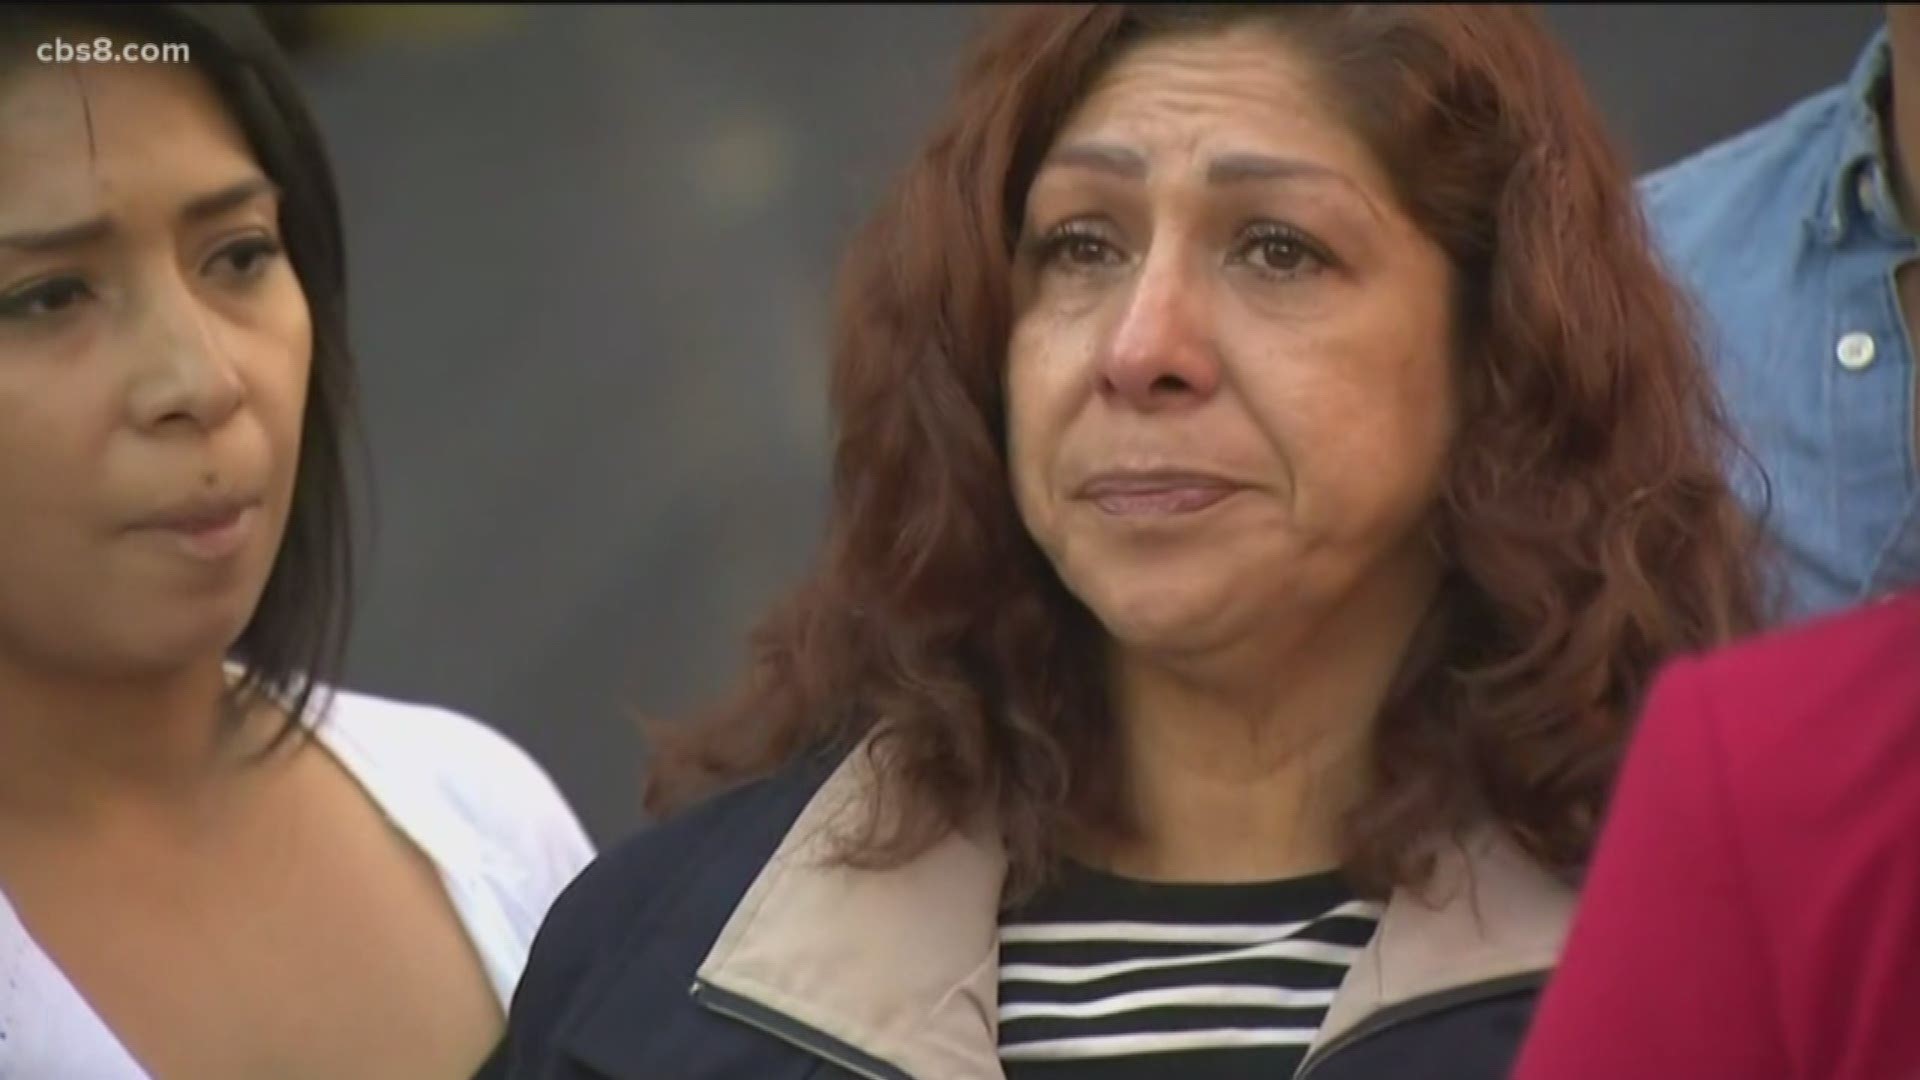 An undocumented mother with a son serving in the U.S. Army has been deported to Mexico.